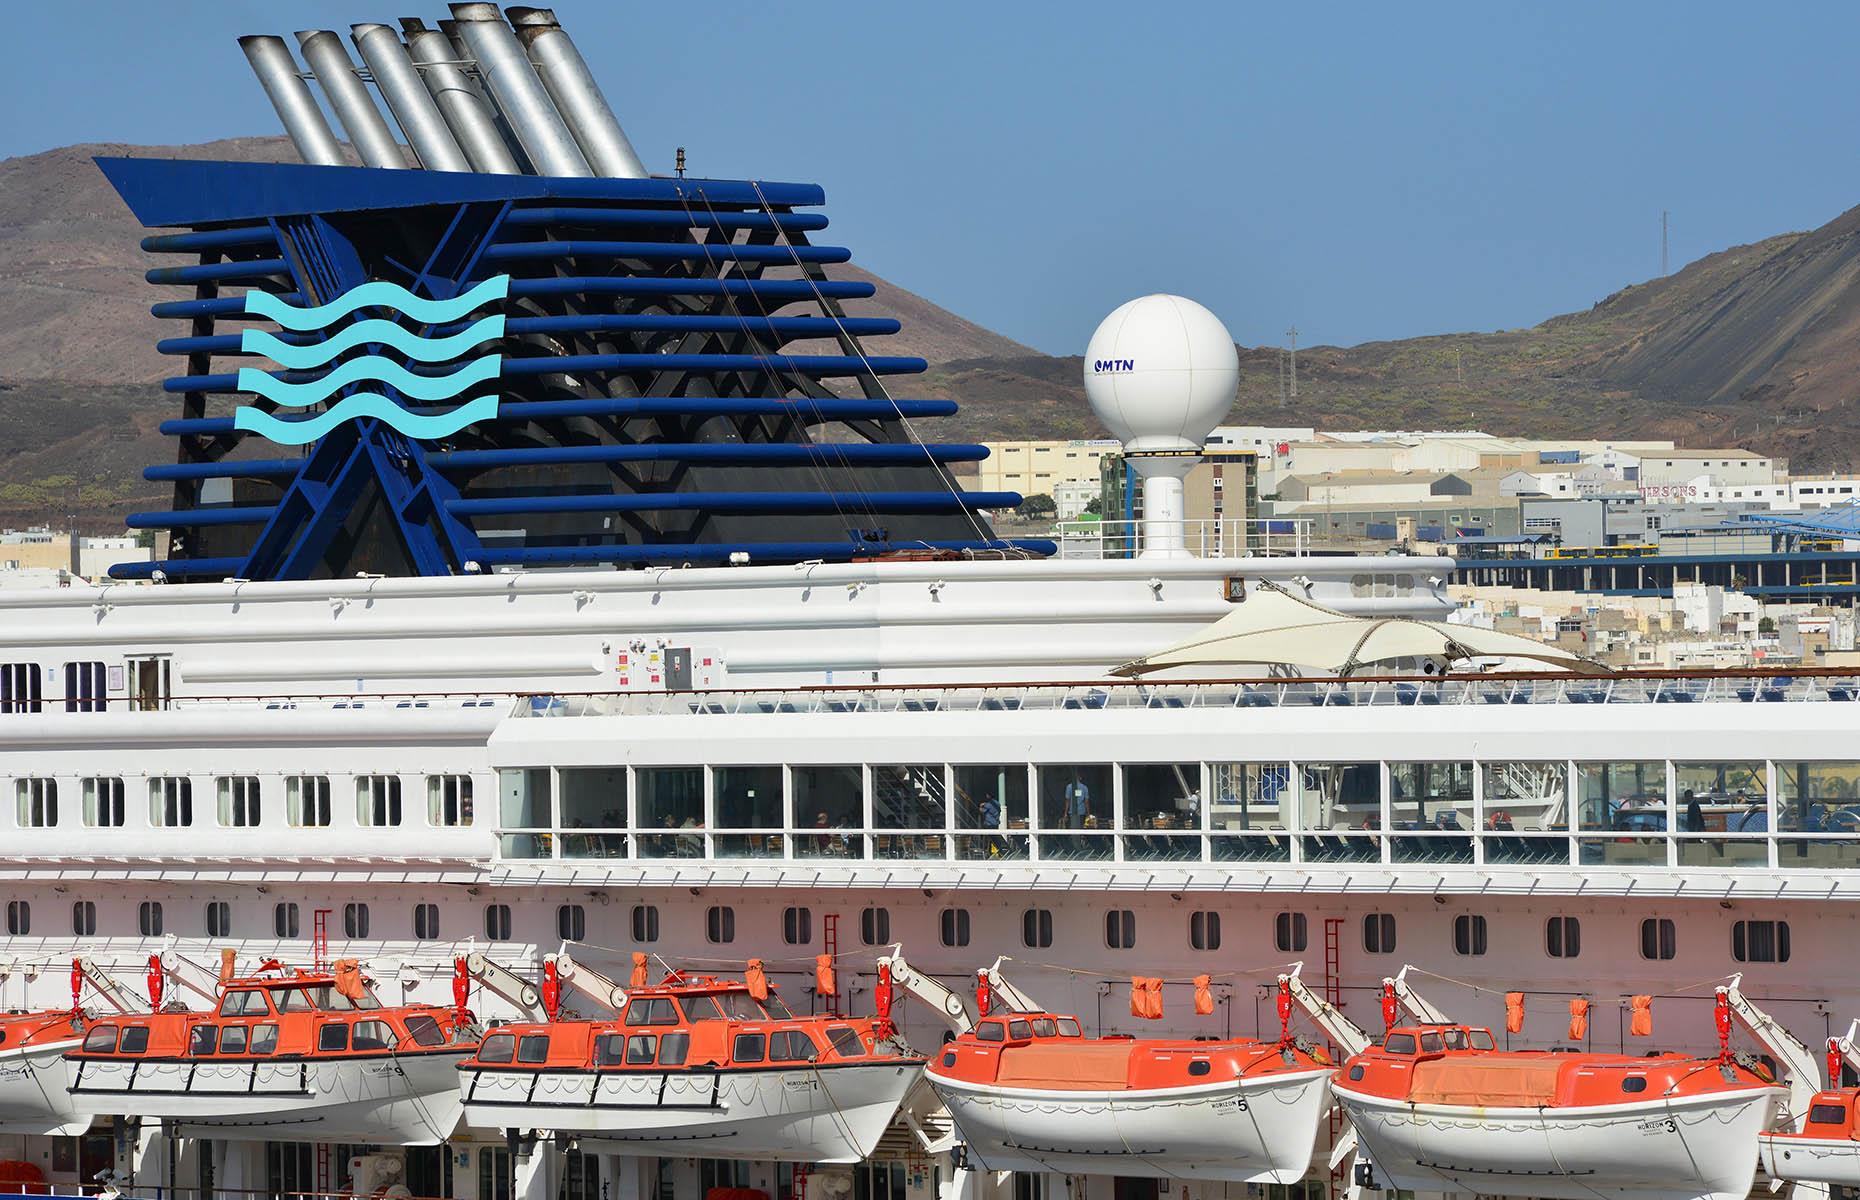 Following the collapse of Pullmantur in June 2020, Royal Caribbean announced that Horizon would be scrapped. It was anchored in Greece and managed to avoid the wrecking ball for two years, before facing its fate in 2022 in Aliaga, Turkey.